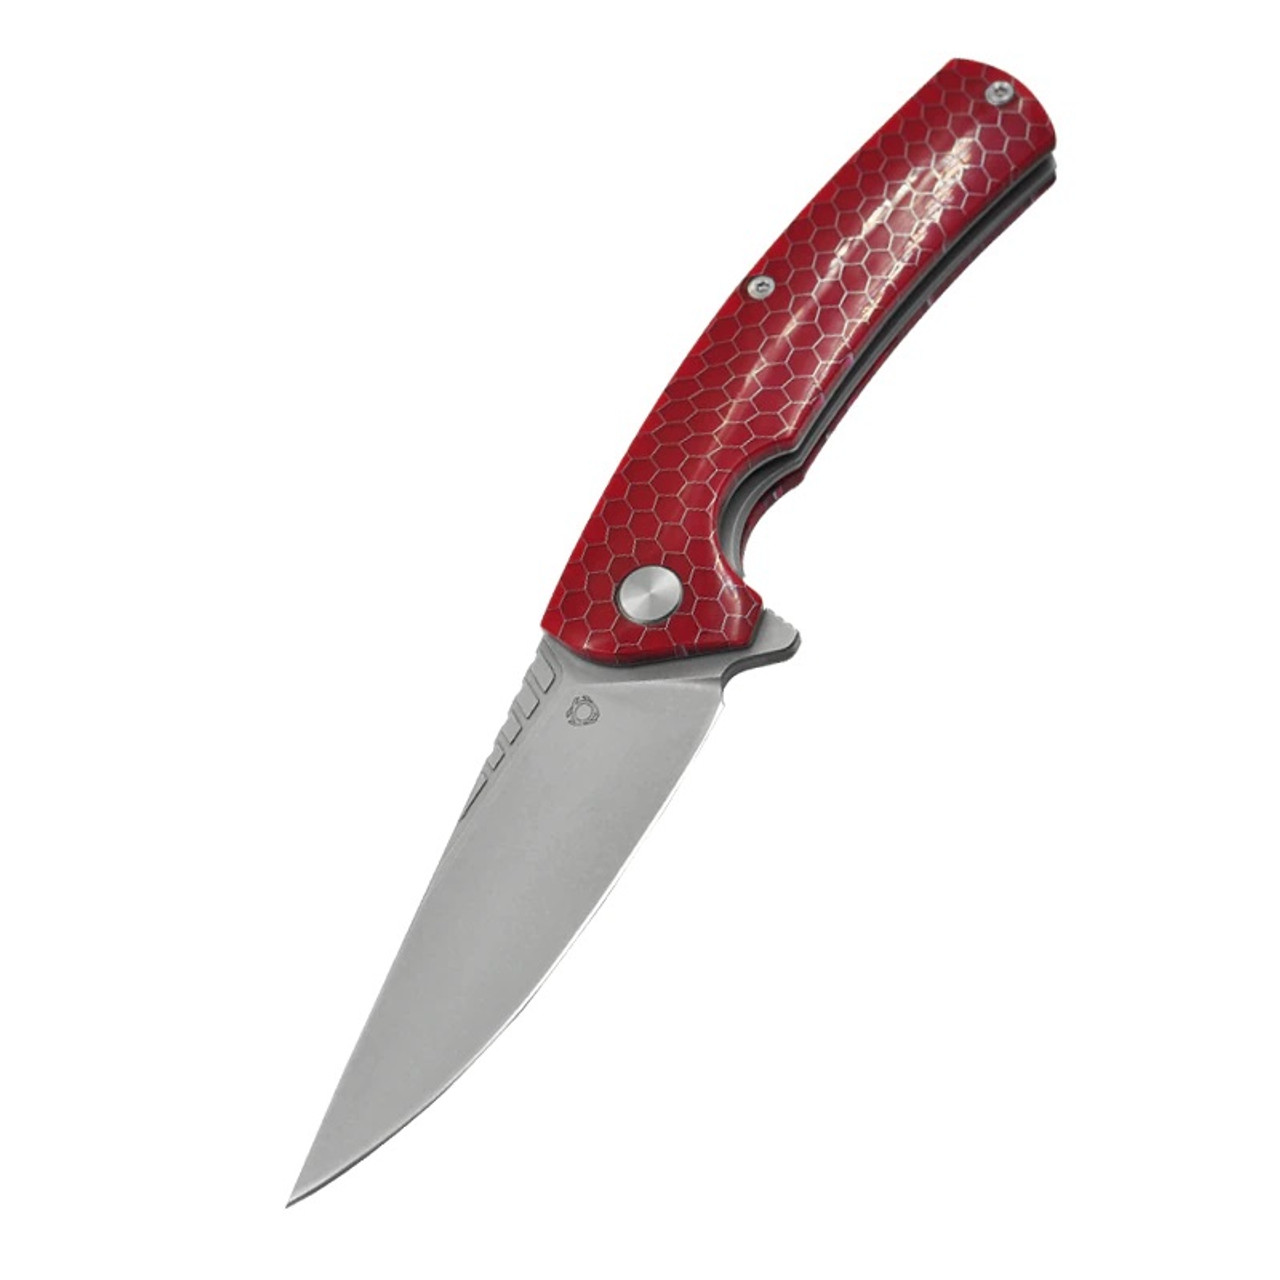 product image for Sixleaf SL 08 Folding Knife with Red Resin Handle